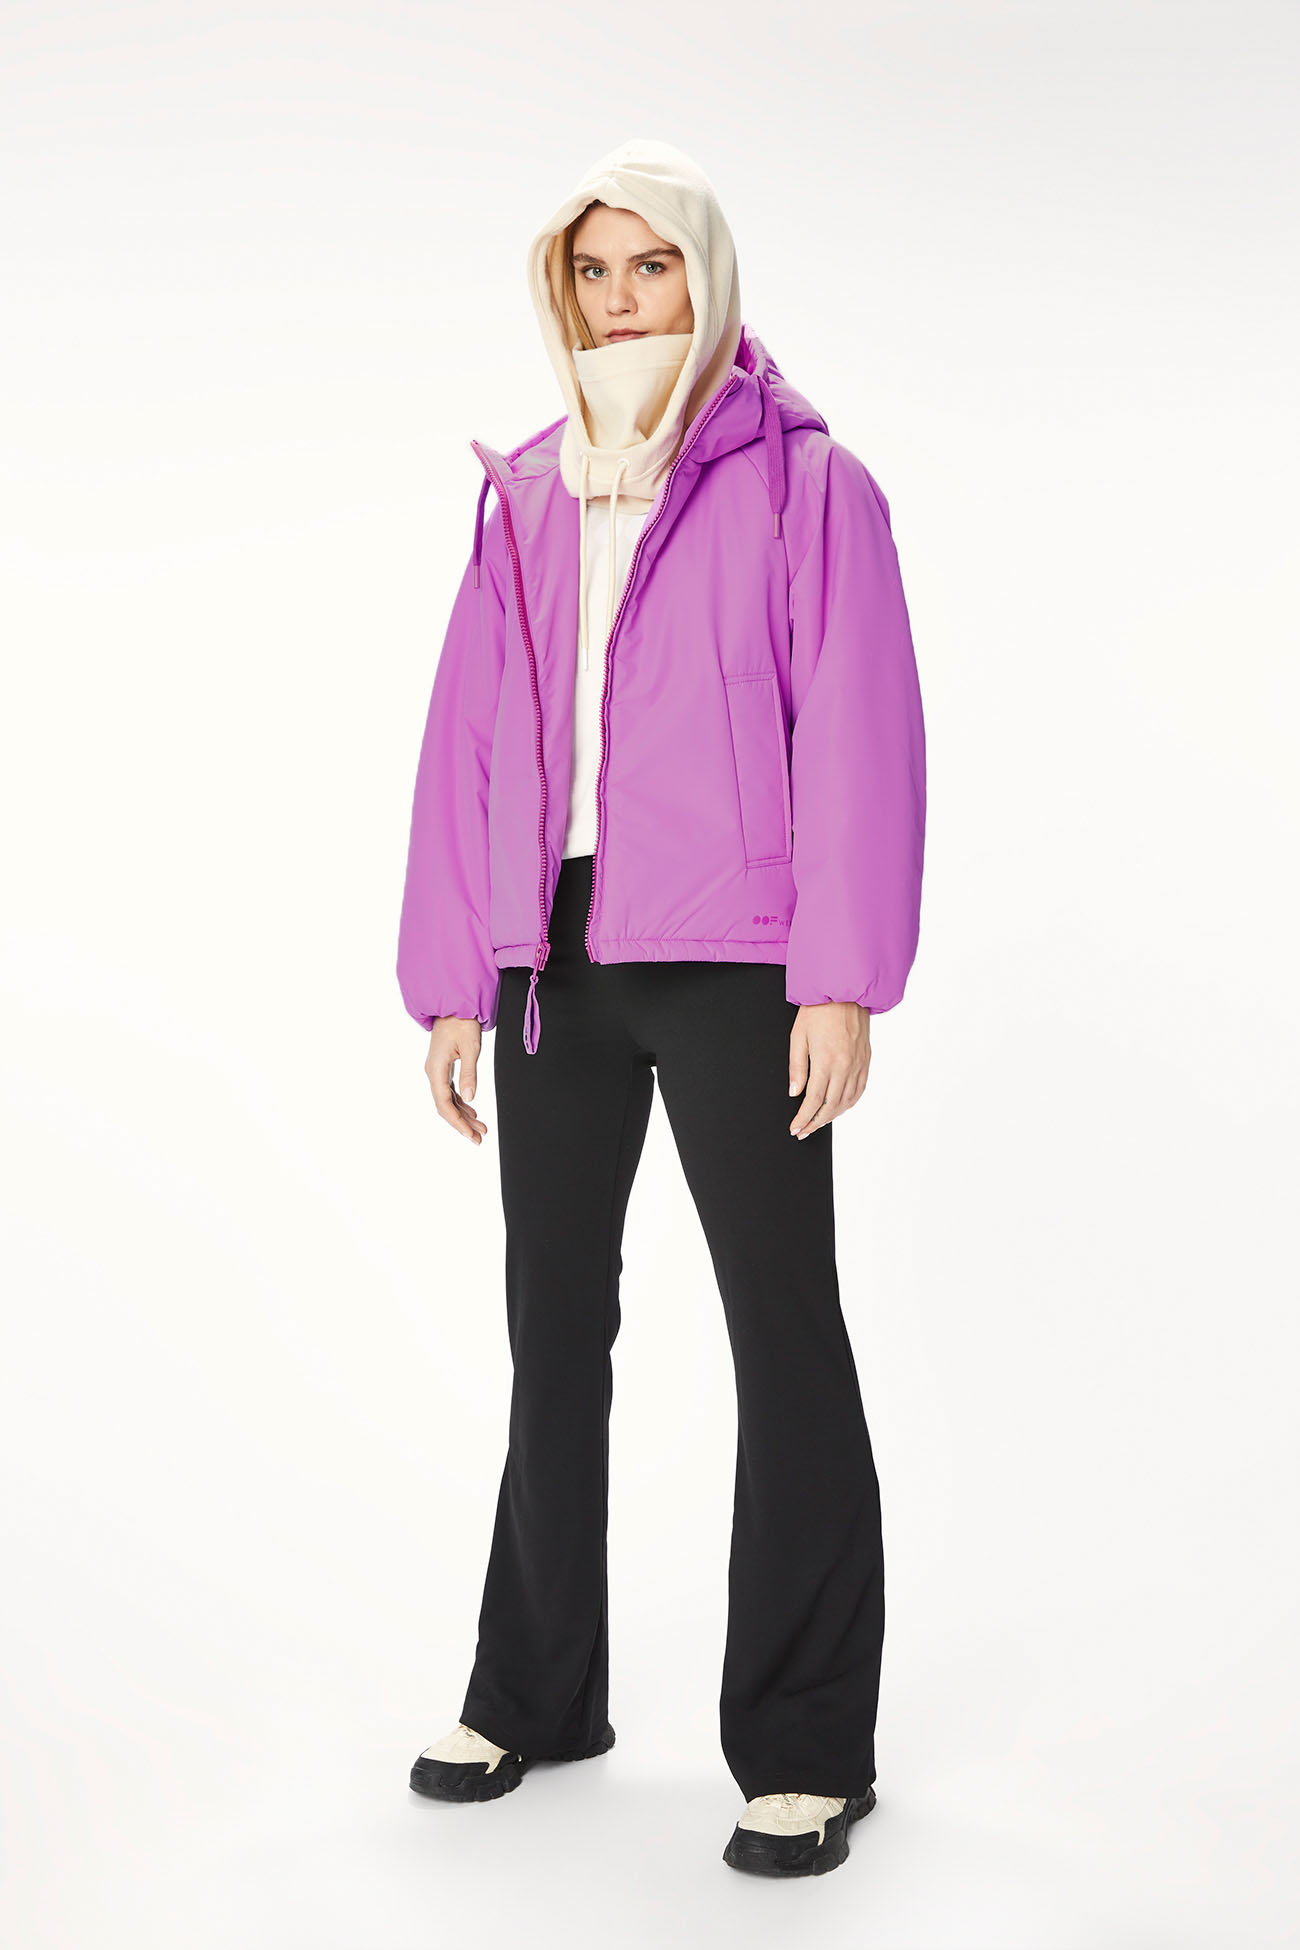 JACKET 9750 MADE IN NYLON - ORCHID - OOF WEAR